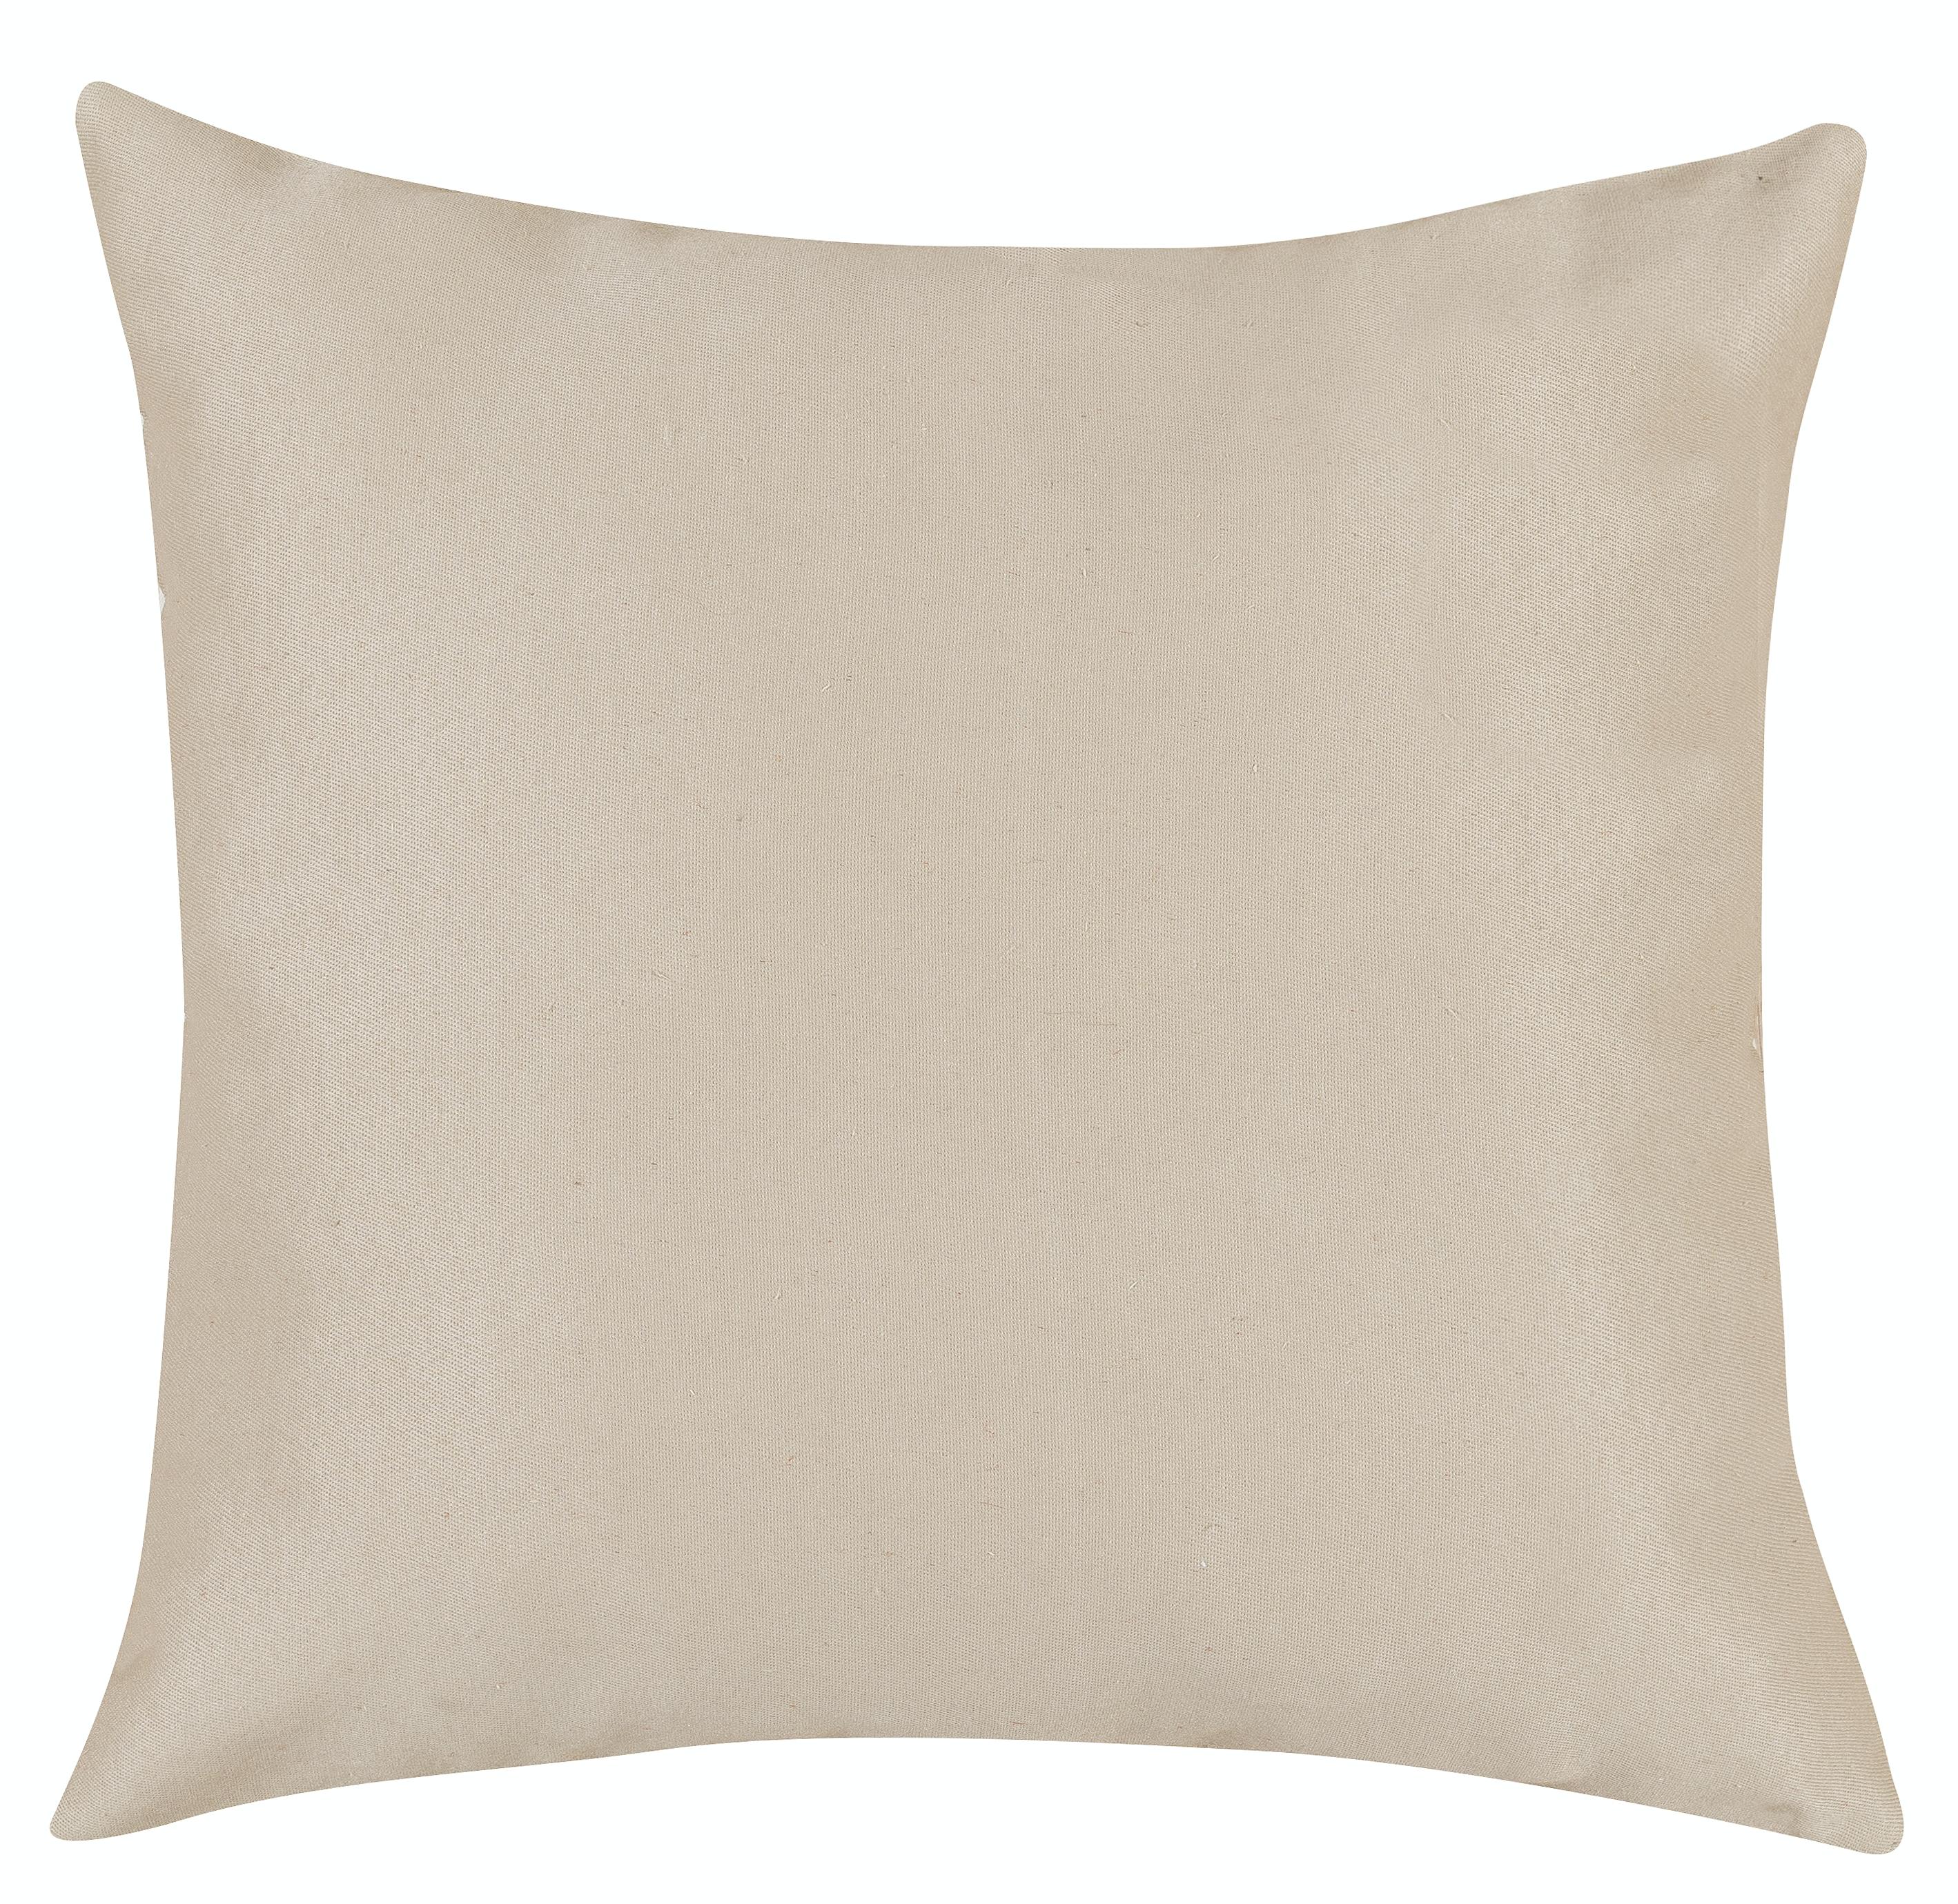 Suzani Contemporary Hand Embroidered Silk Cushion Cover in Green and Cream